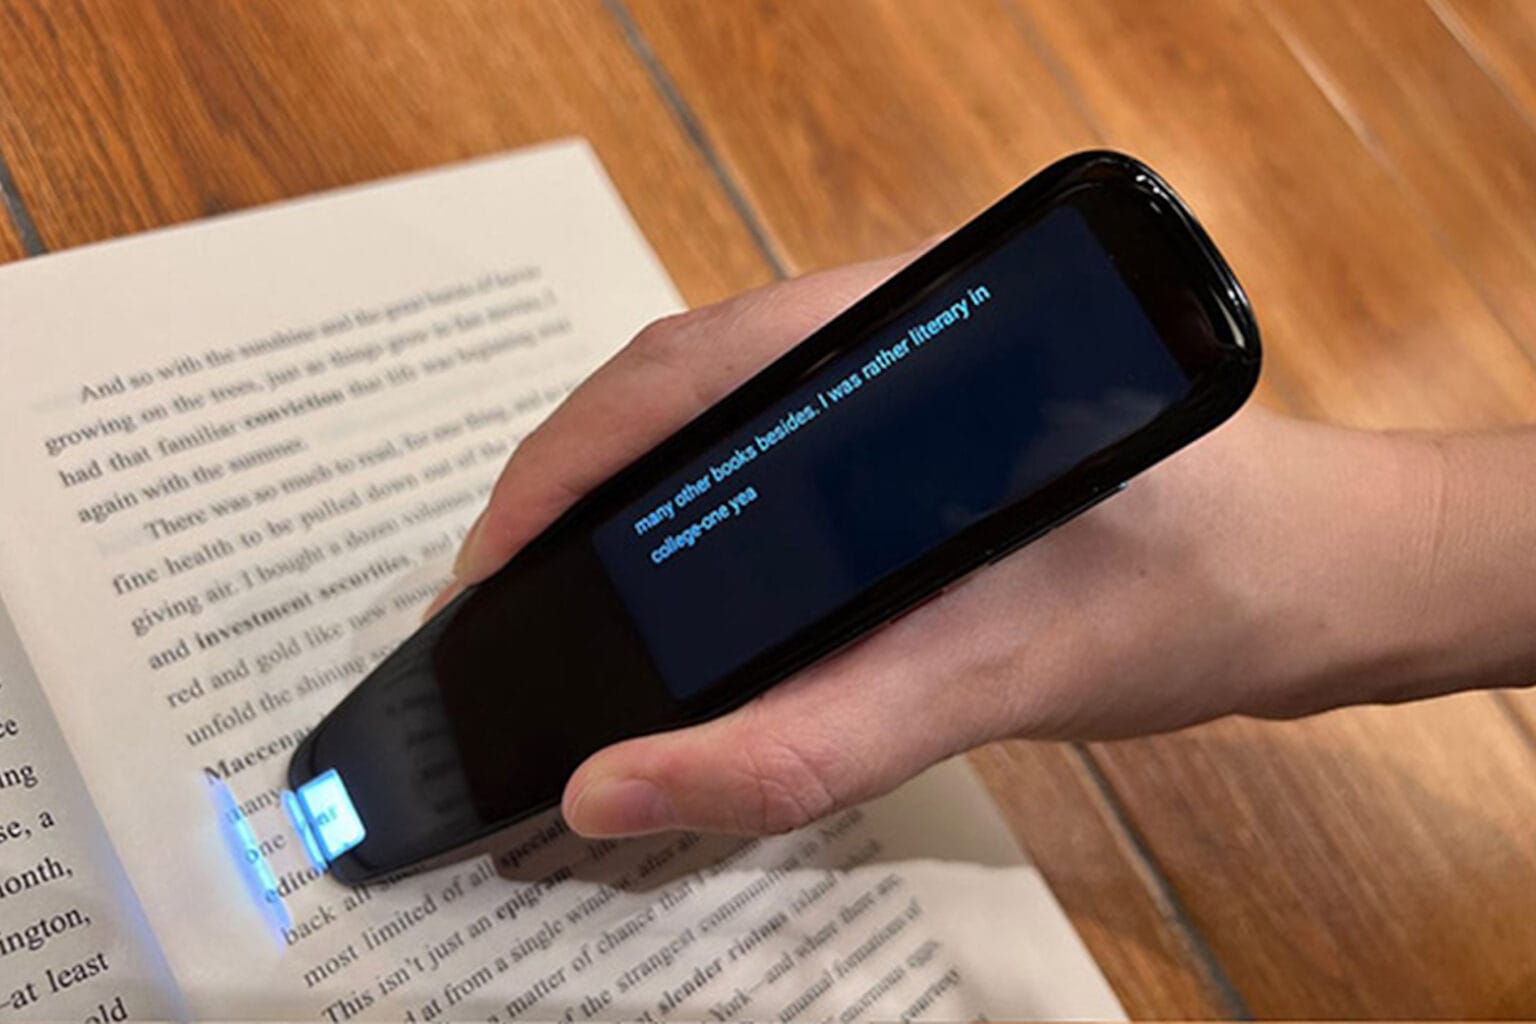 Get text or spoken translations from 112 languages in an instant with this scanner.